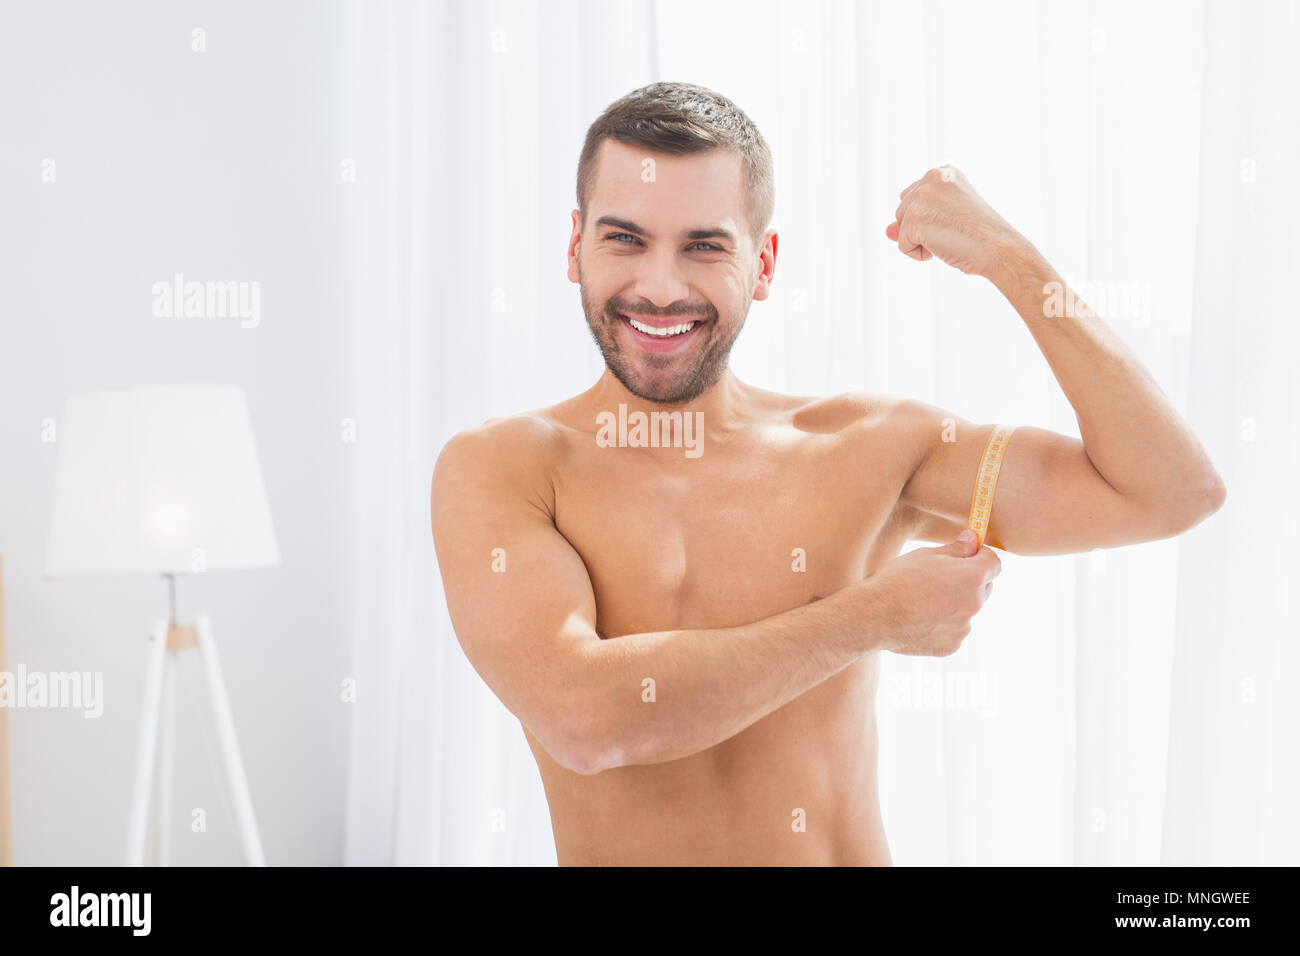 Nice well built man showing his muscles Stock Photo